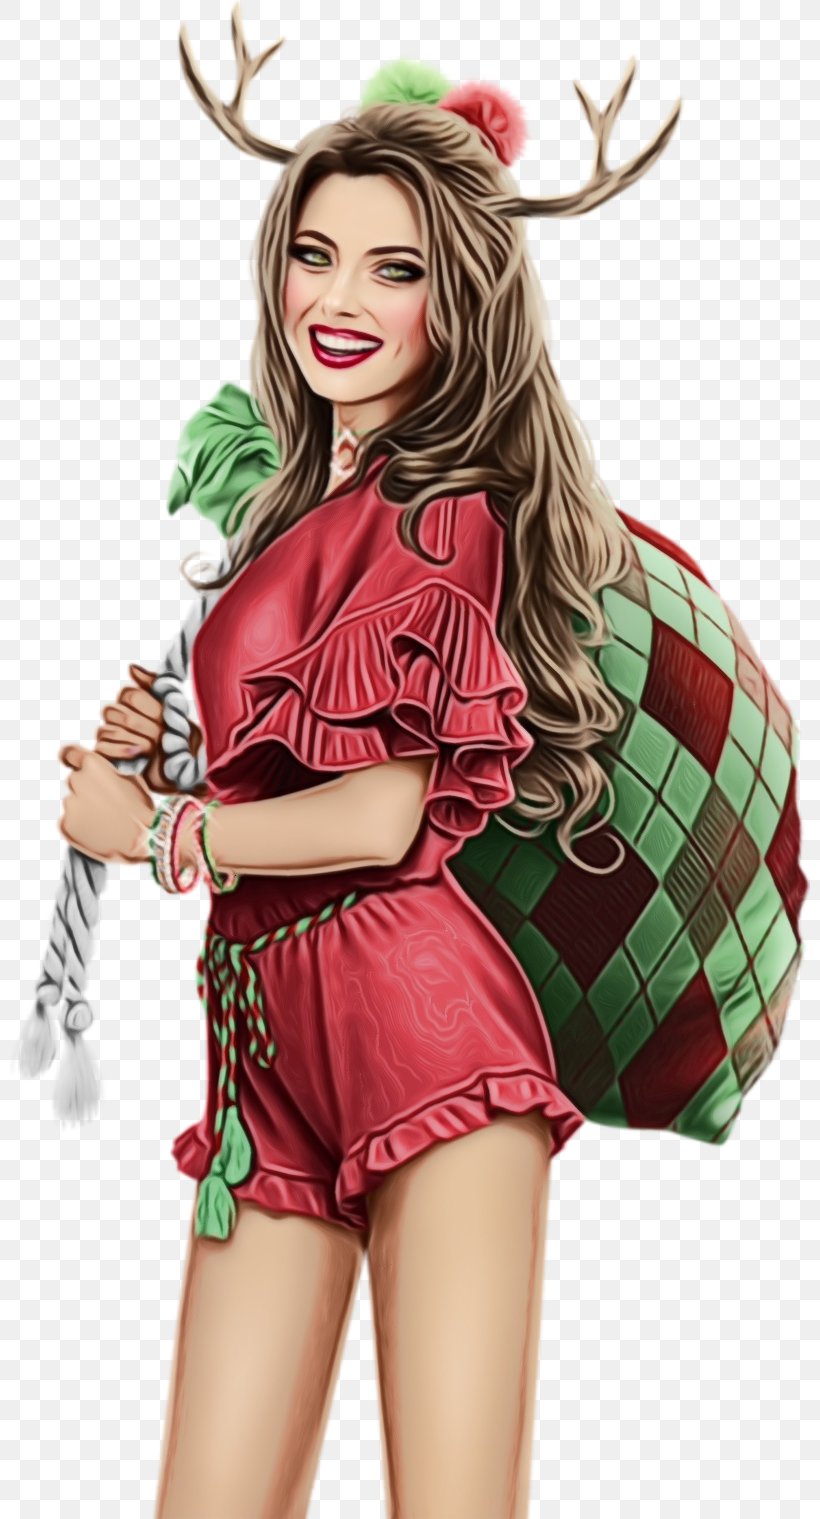 Clothing Plaid Pattern Outerwear Costume, PNG, 800x1519px, Watercolor, Clothing, Costume, Model, Outerwear Download Free